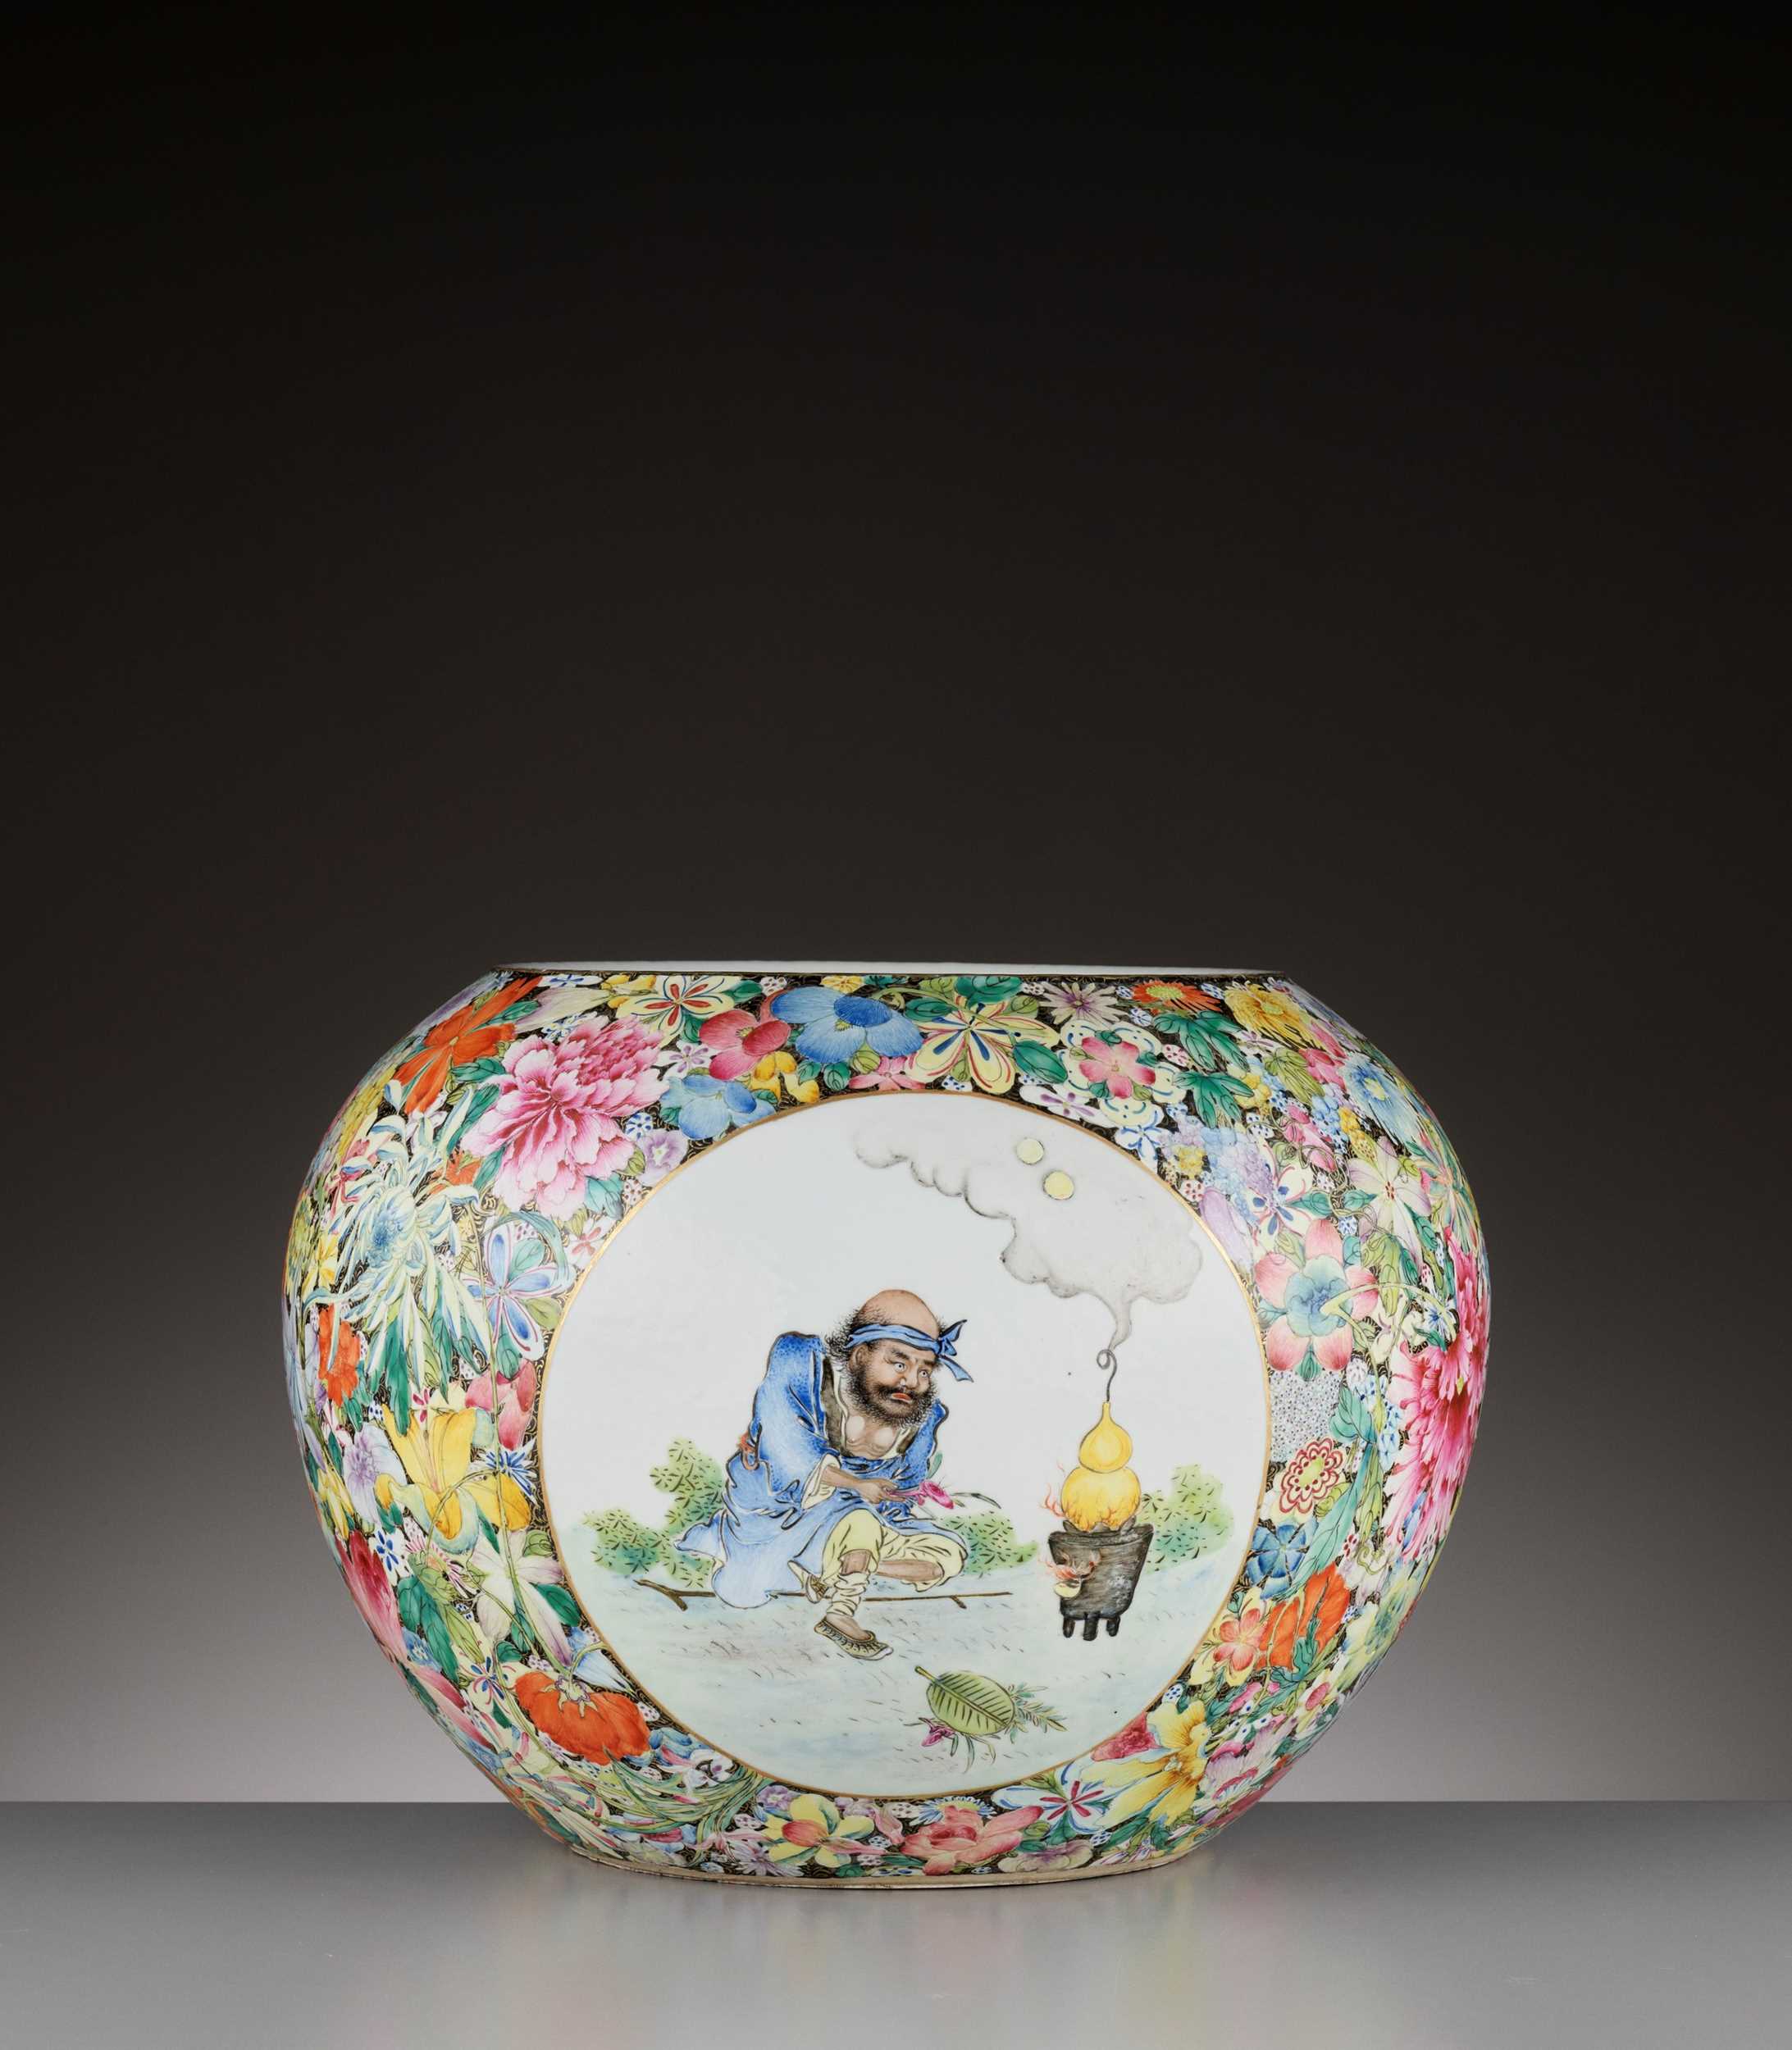 Lot 319 - A VERY LARGE MILLEFLEUR-ENAMELED ‘IMMORTALS’ BOWL, REPUBLIC PERIOD